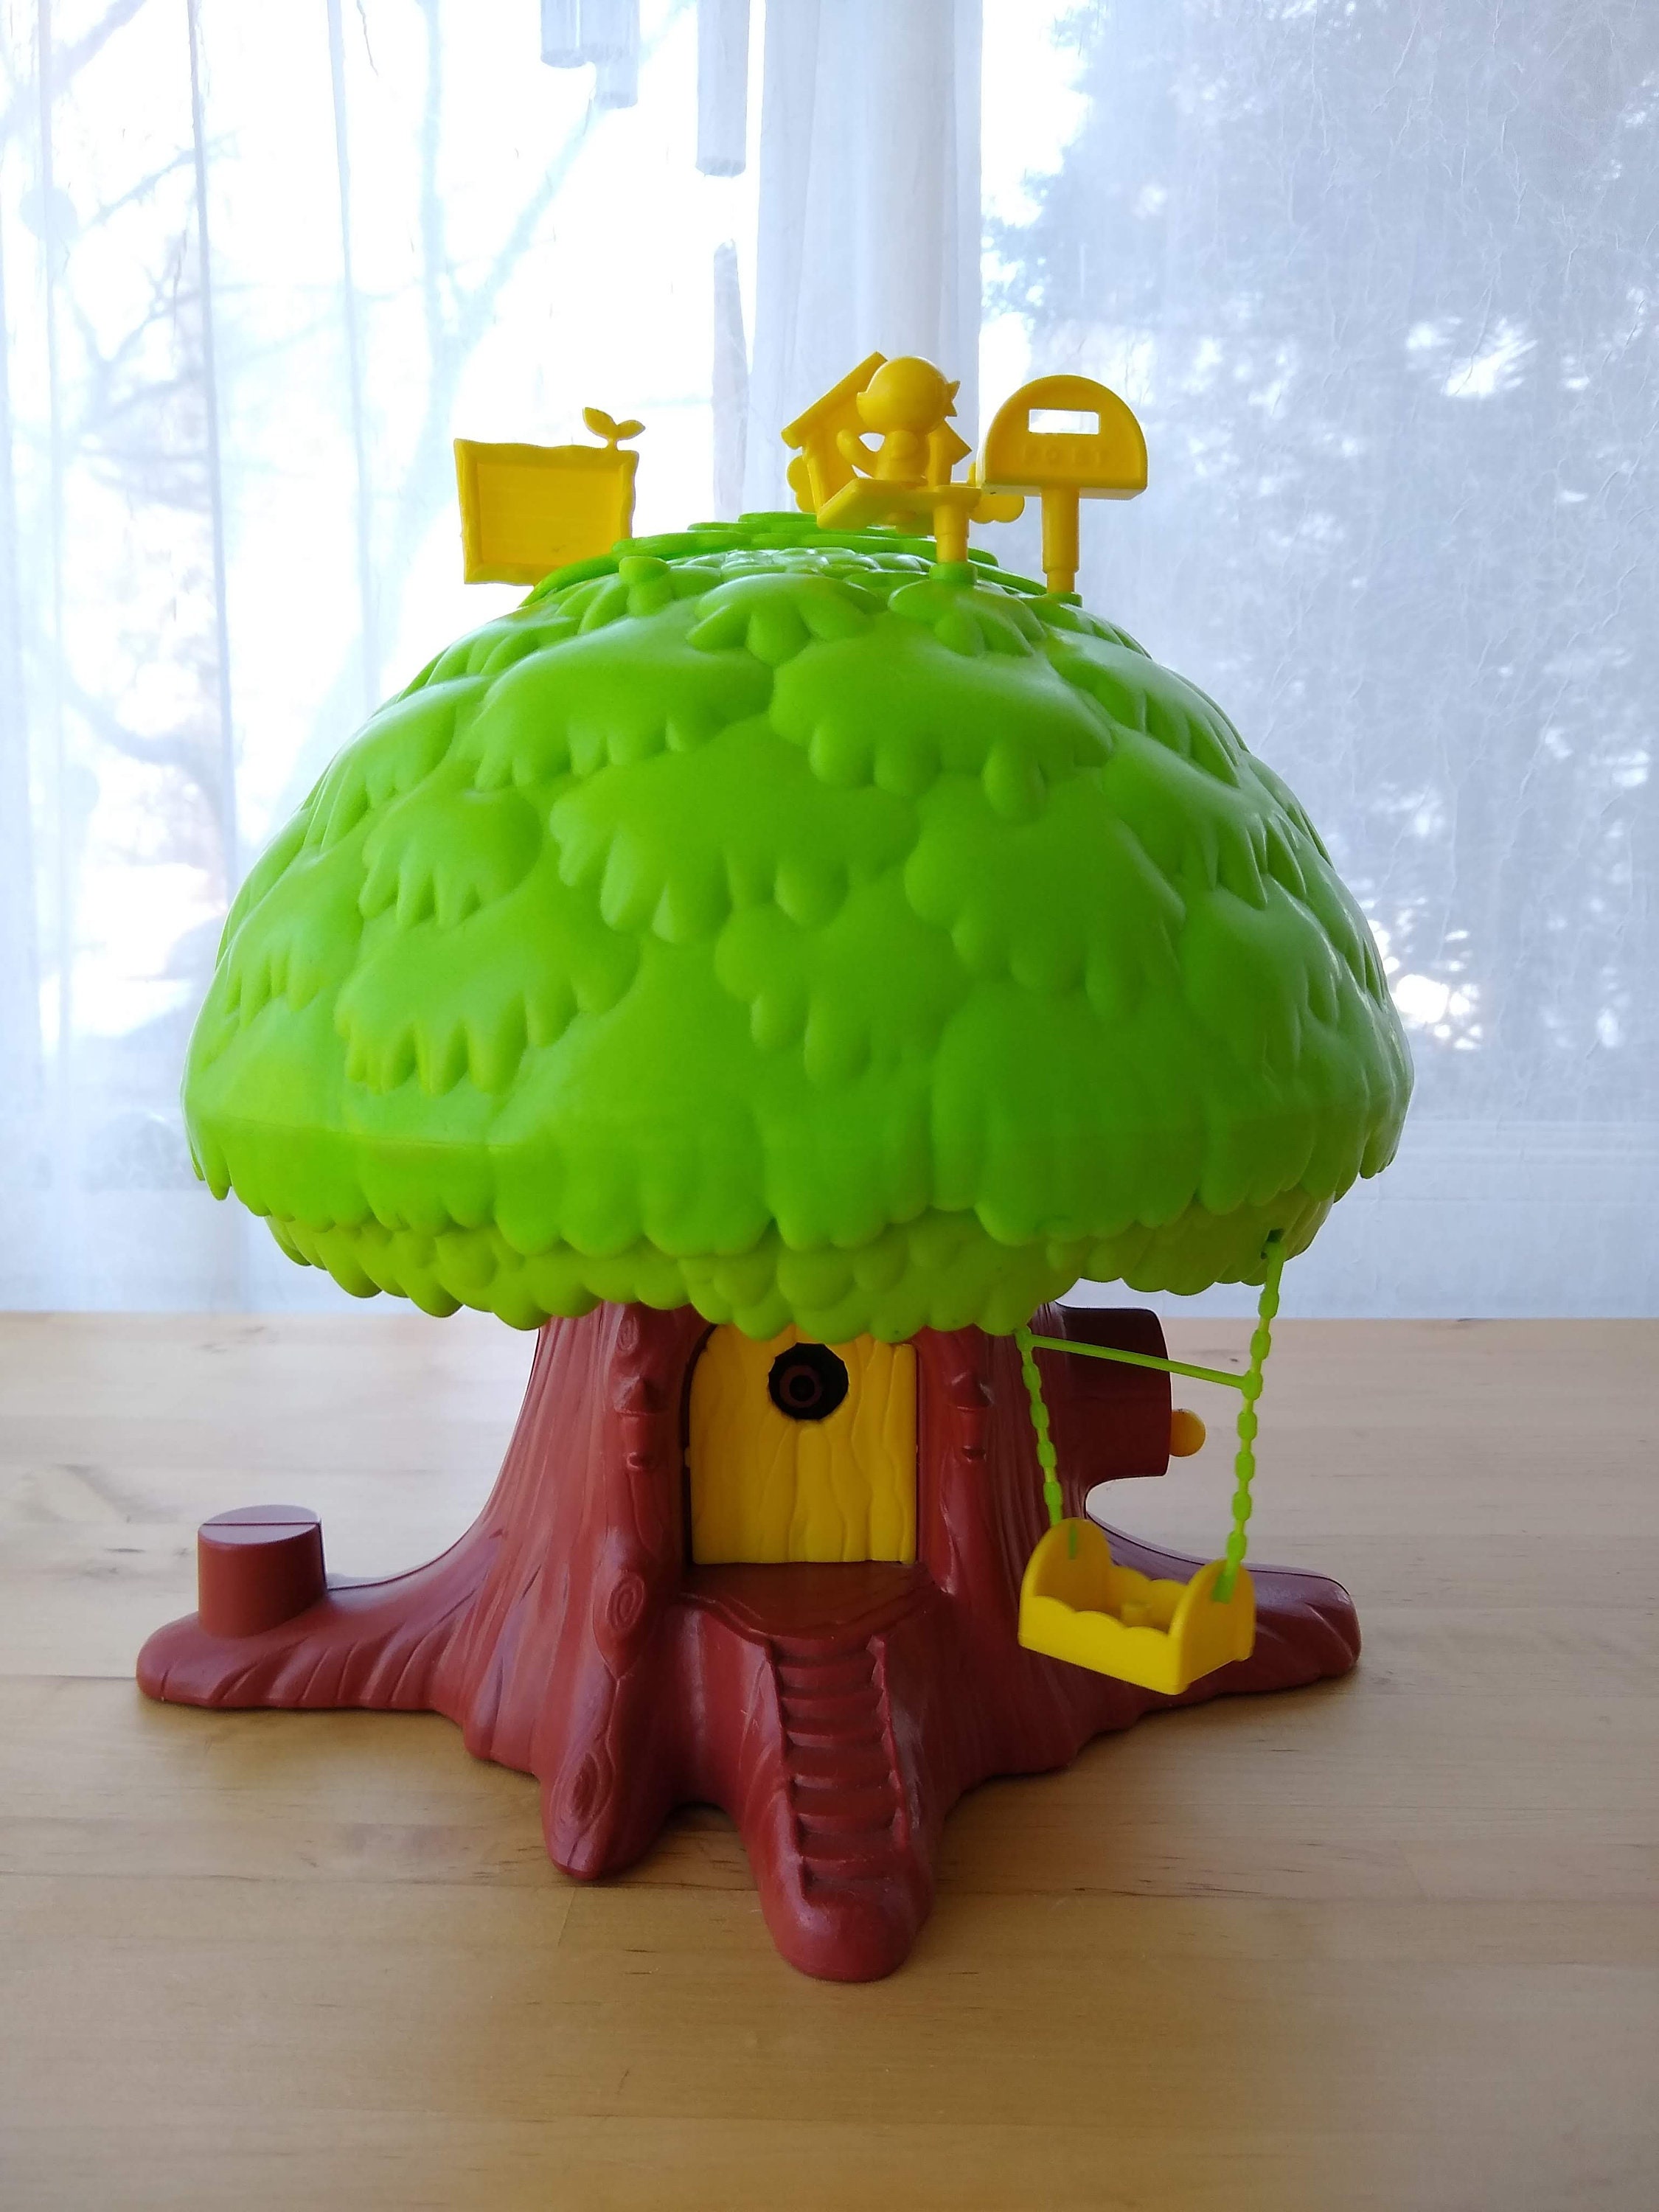 Ultimate Crayon Collection – Treehouse Toys